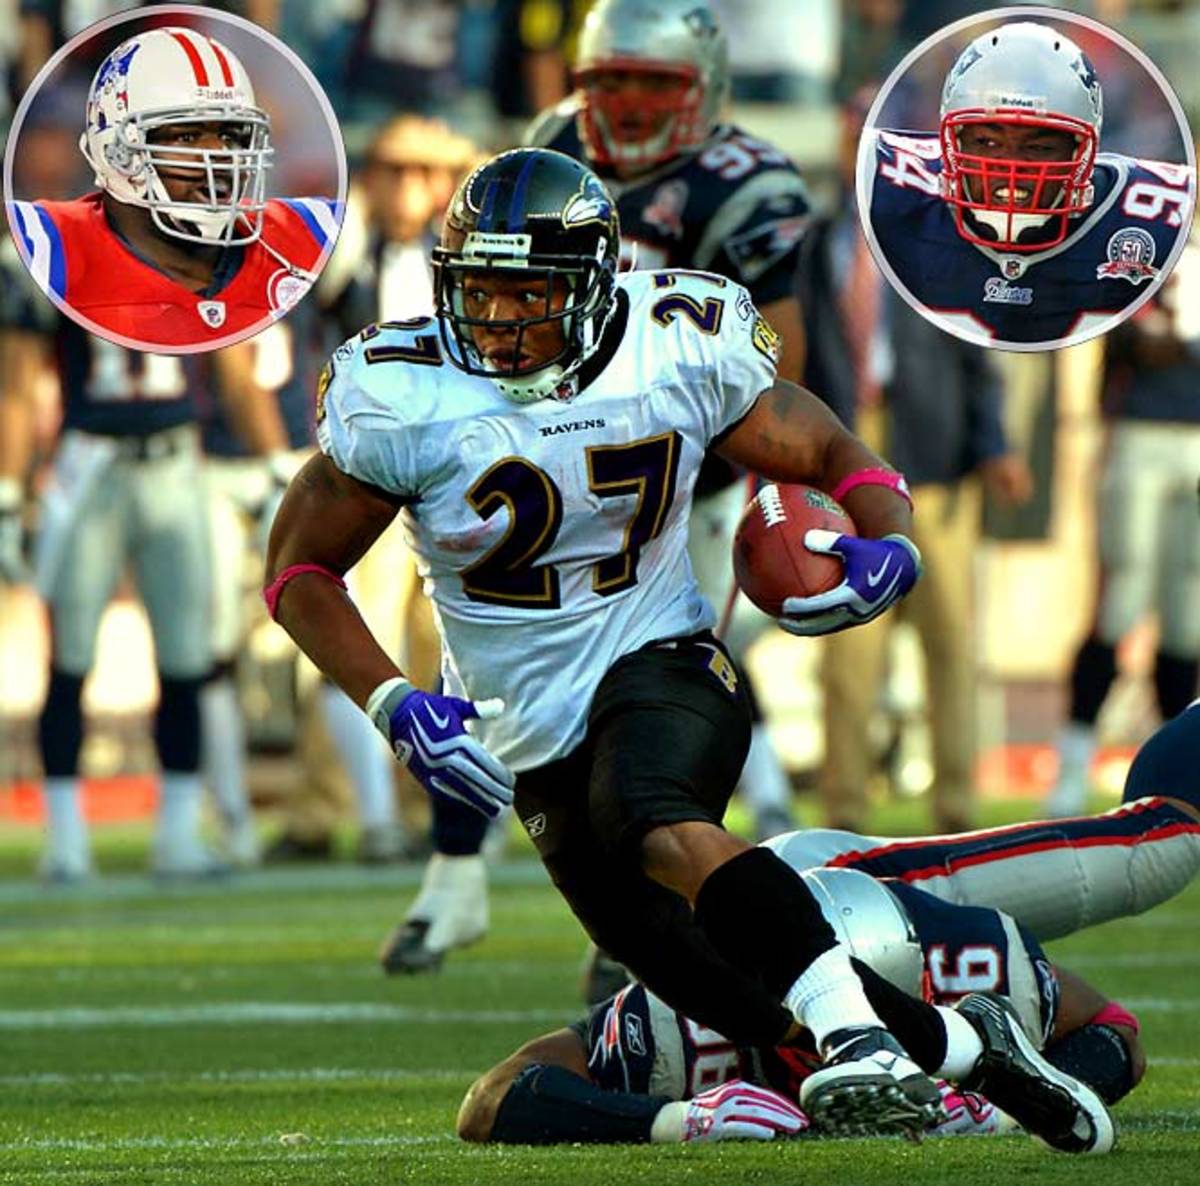 Ravens' RB Ray Rice vs. Patriots DLs Vince Wilfork and Ty Warren